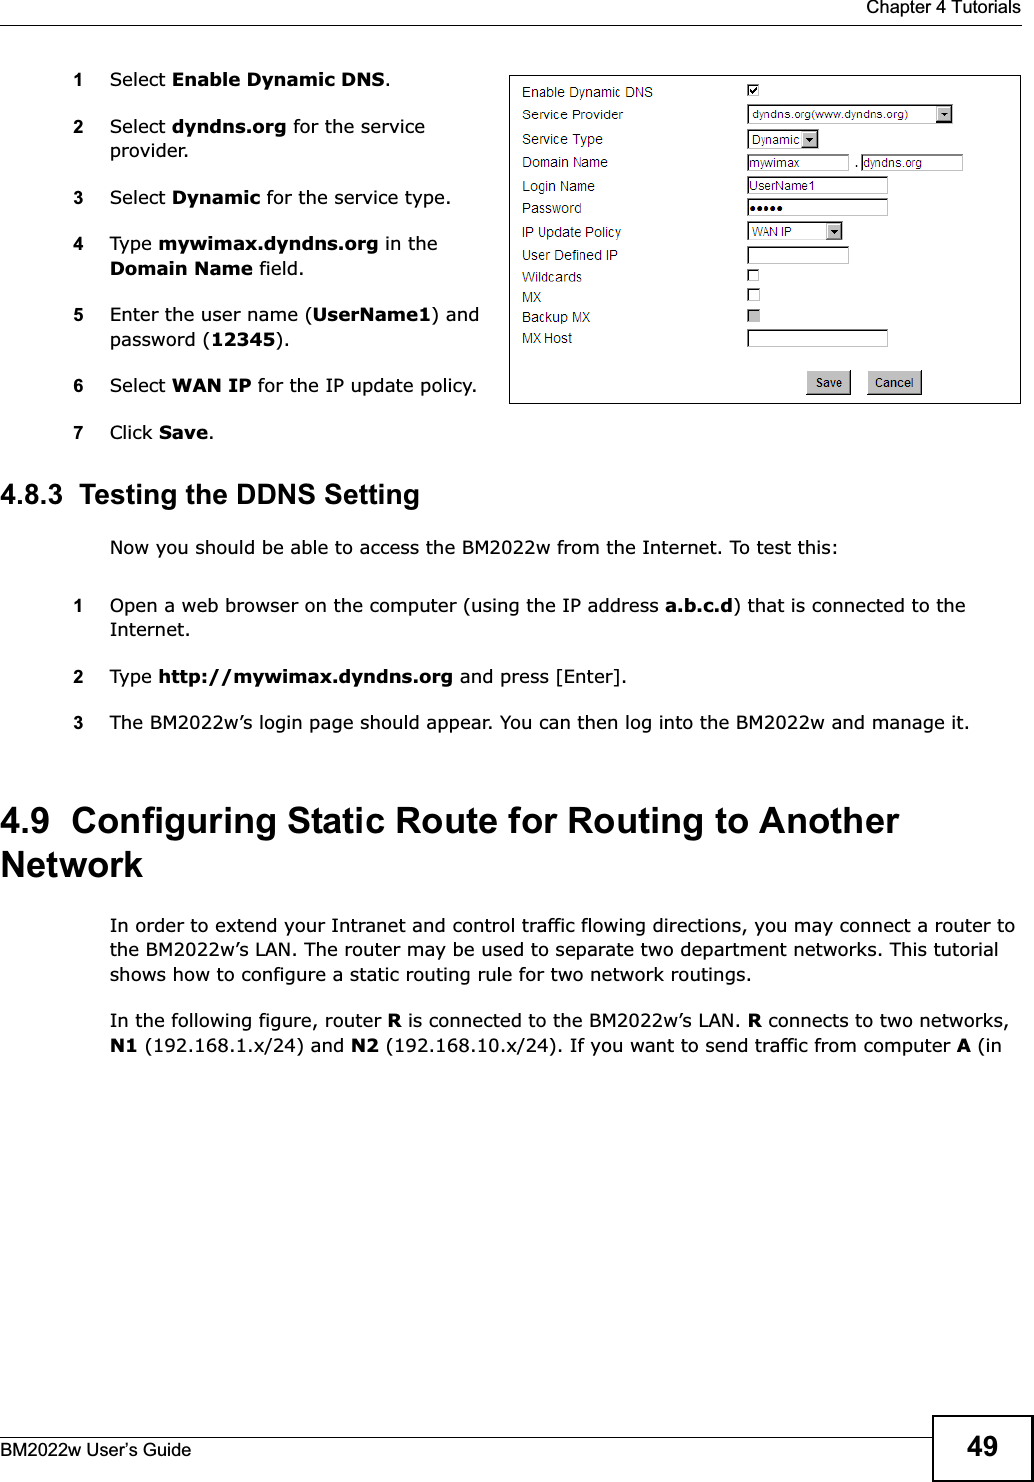  Chapter 4 TutorialsBM2022w User’s Guide 491Select Enable Dynamic DNS.2Select dyndns.org for the service provider.3Select Dynamic for the service type.4Type mywimax.dyndns.org in the Domain Name field.5Enter the user name (UserName1) and password (12345).6Select WAN IP for the IP update policy.7Click Save.4.8.3  Testing the DDNS SettingNow you should be able to access the BM2022w from the Internet. To test this:1Open a web browser on the computer (using the IP address a.b.c.d) that is connected to the Internet.2Type http://mywimax.dyndns.org and press [Enter].3The BM2022w’s login page should appear. You can then log into the BM2022w and manage it.4.9  Configuring Static Route for Routing to Another NetworkIn order to extend your Intranet and control traffic flowing directions, you may connect a router to the BM2022w’s LAN. The router may be used to separate two department networks. This tutorial shows how to configure a static routing rule for two network routings.In the following figure, router R is connected to the BM2022w’s LAN. R connects to two networks, N1 (192.168.1.x/24) and N2 (192.168.10.x/24). If you want to send traffic from computer A (in 